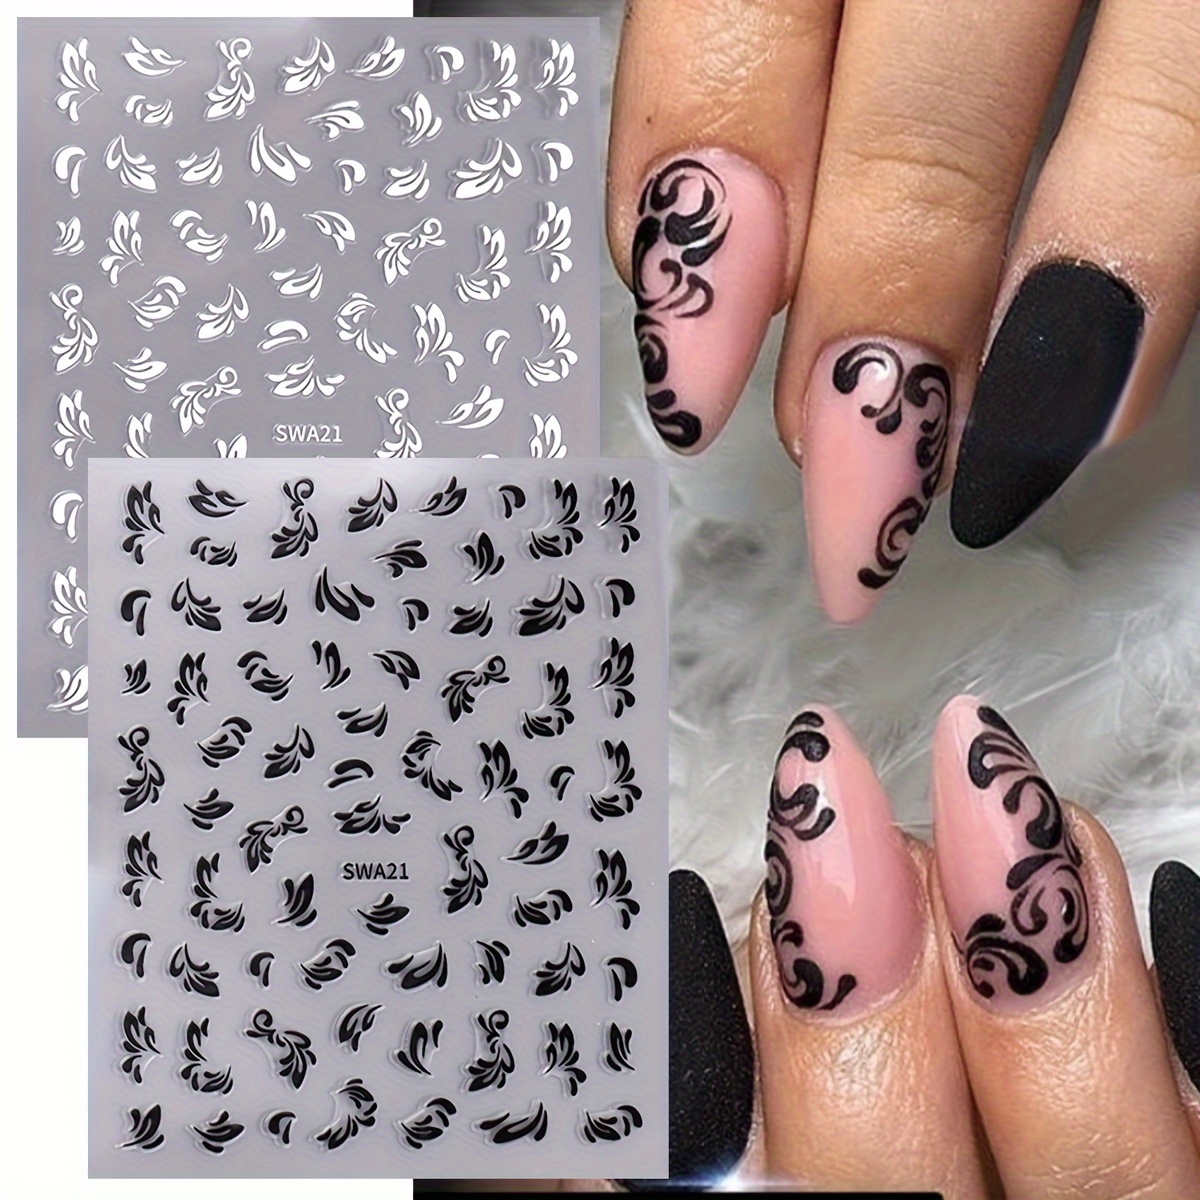 

Fantasy Leaf Design Stickers For Nails - Swa21 Black & White, Plastic, Self-adhesive, Dazzling, One-time Use, Rectangle, Matte Finish